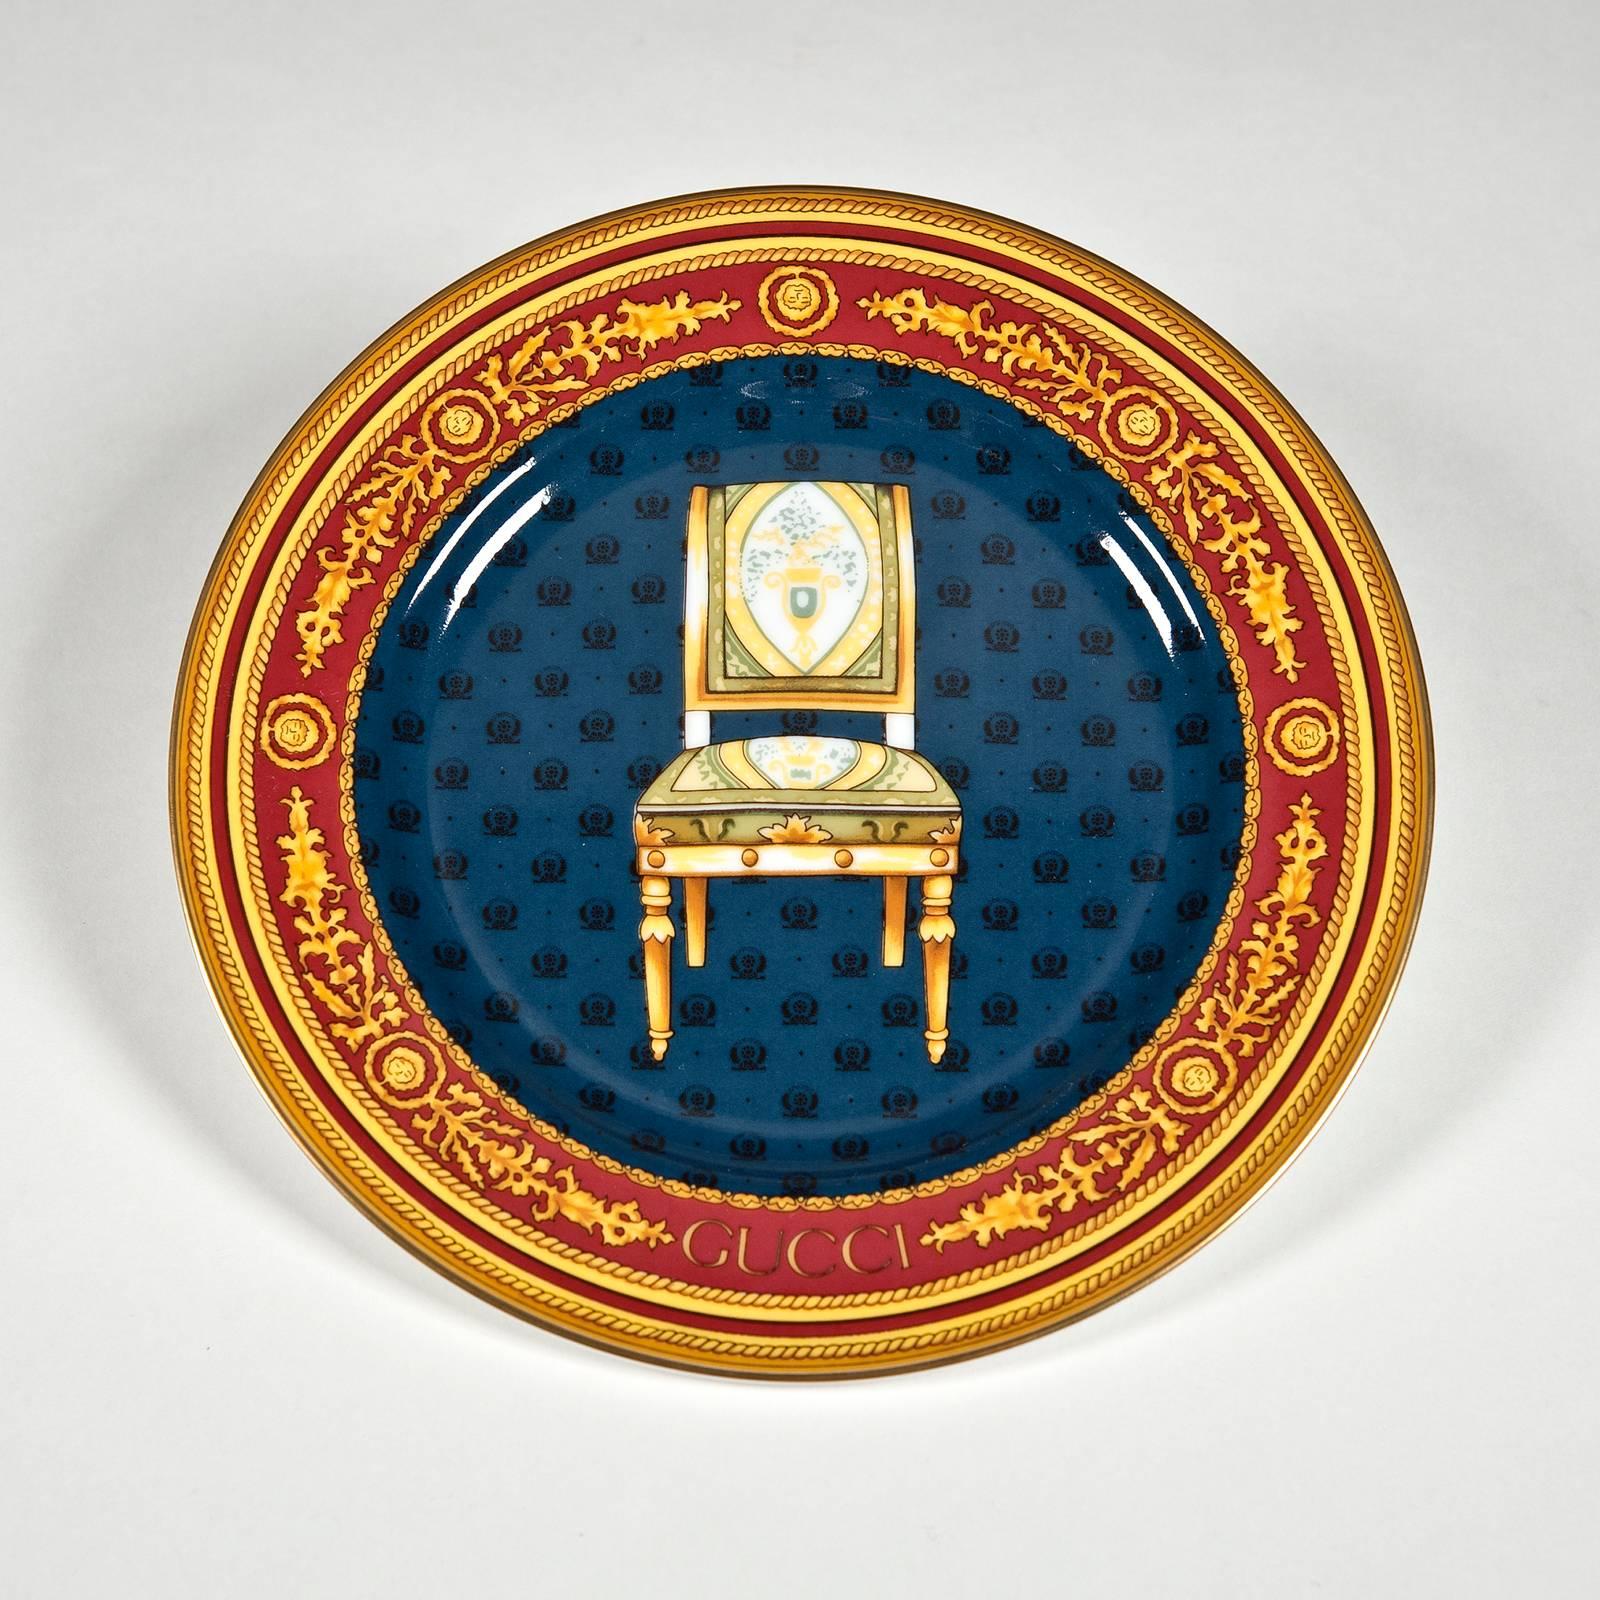 Porcelain with signature Gucci details including gilt gold tops, and gilt edging with gold rope motif and Gucci Vermillion accents. A fine gold line delineates the tops of the serving pieces and the edges of the plates. Side views of four different